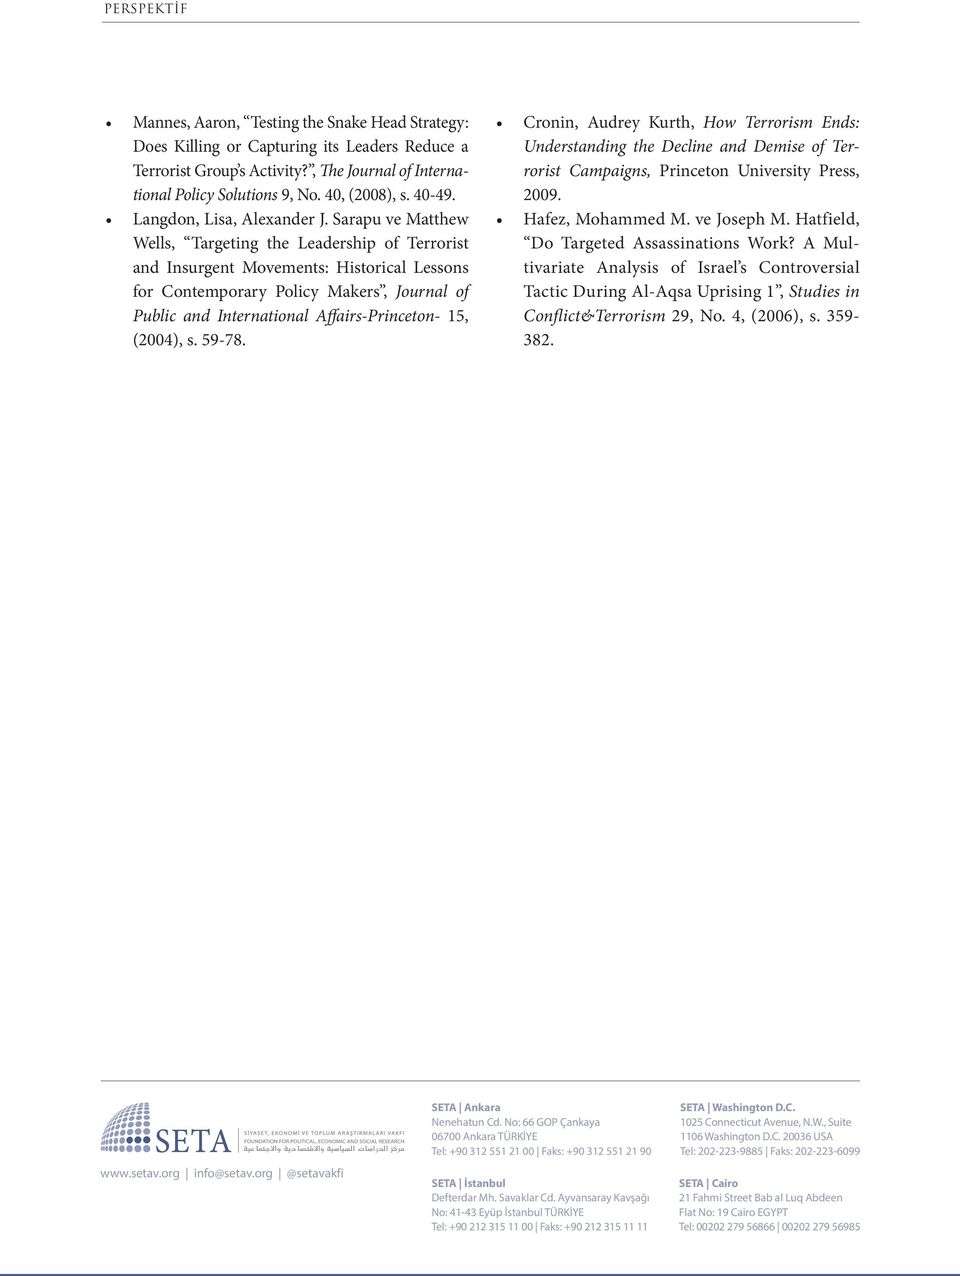 Sarapu ve Matthew Wells, Targeting the Leadership of Terrorist and Insurgent Movements: Historical Lessons for Contemporary Policy Makers, Journal of Public and International Affairs-Princeton- 15,